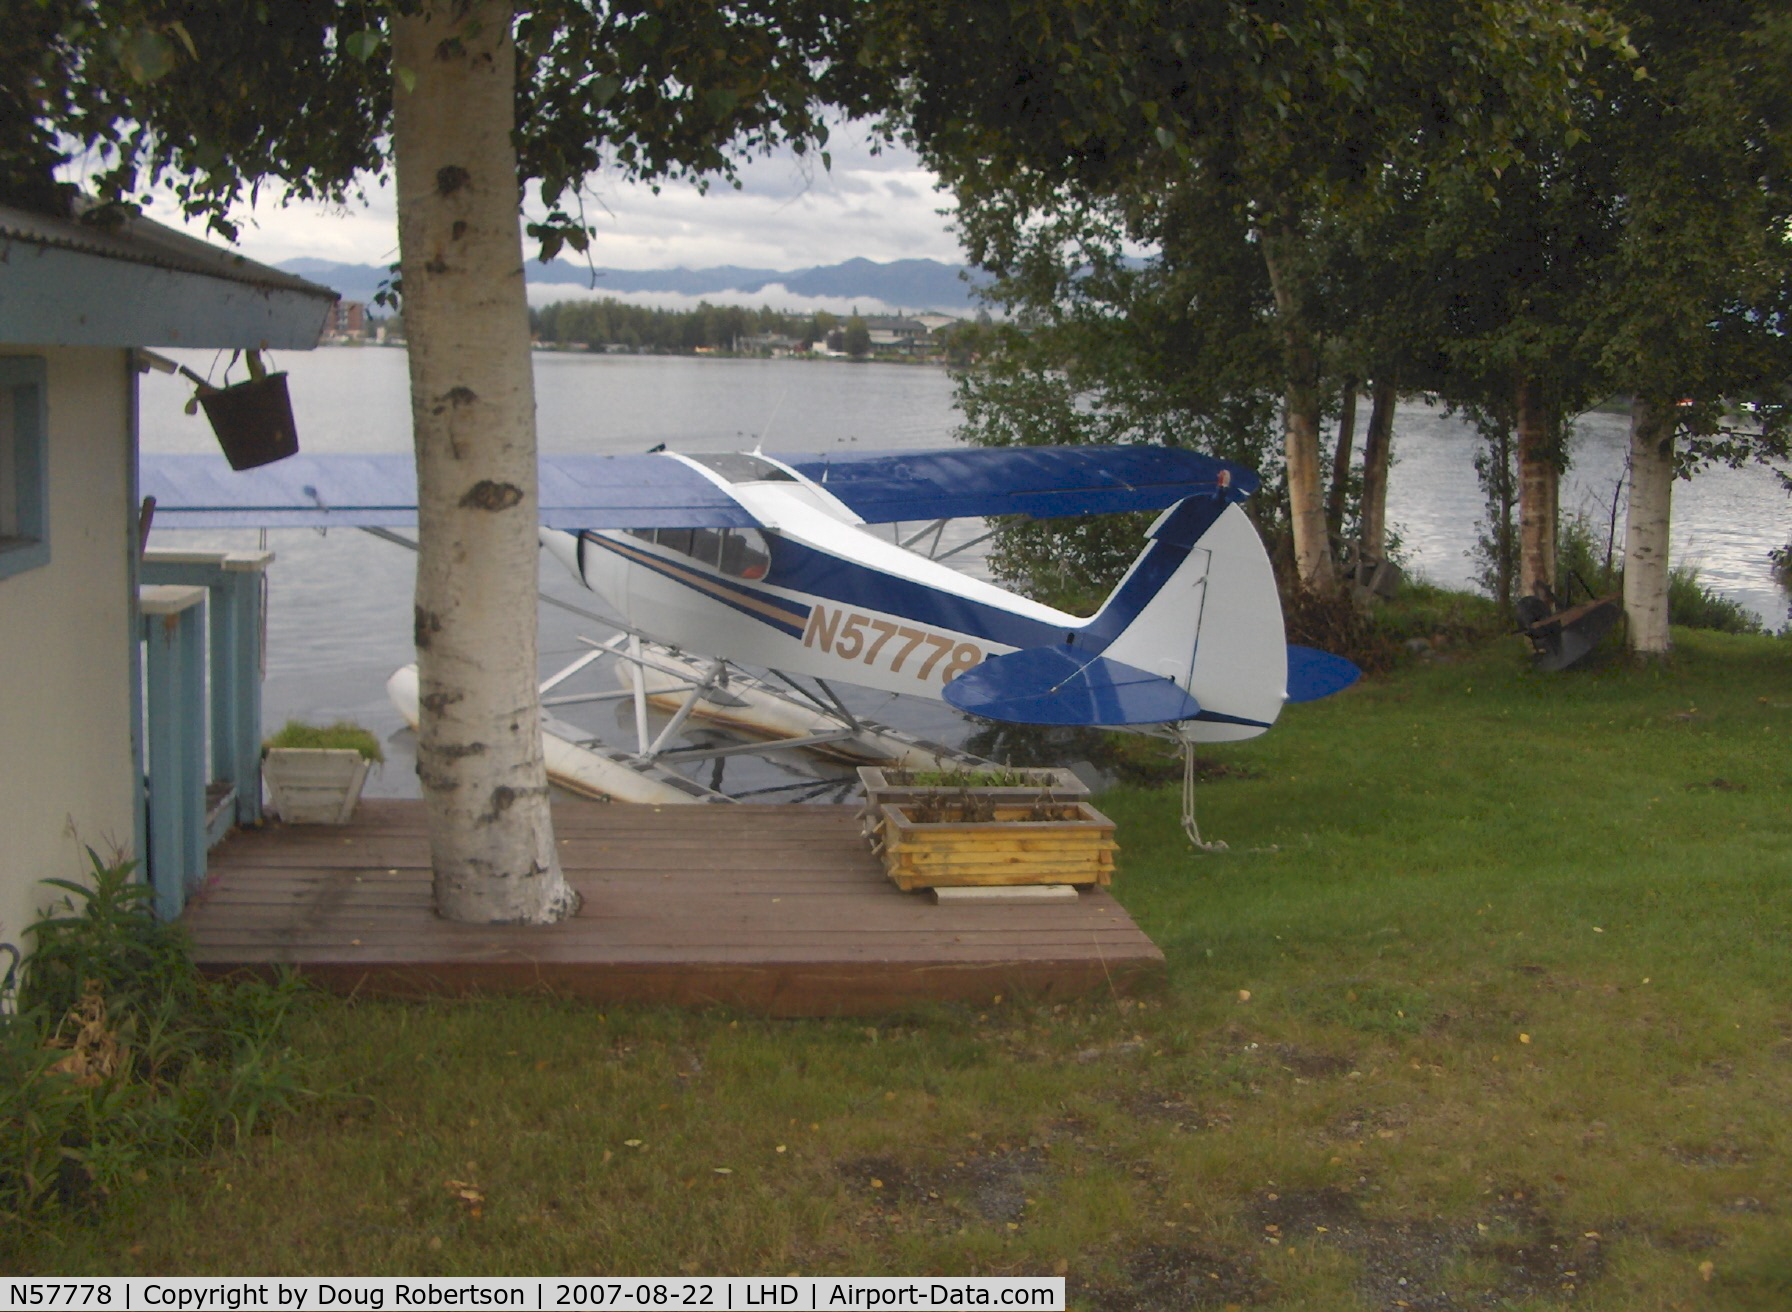 N57778, Piper PA-18-150 Super Cub C/N 18-7709129, 1977 Piper PA-18-150 SUPER CUB on floats, Lycoming O-320 150 Hp, with very nice 'line shack' & mooring on Lake Spenard contiguous with Lake Hood.